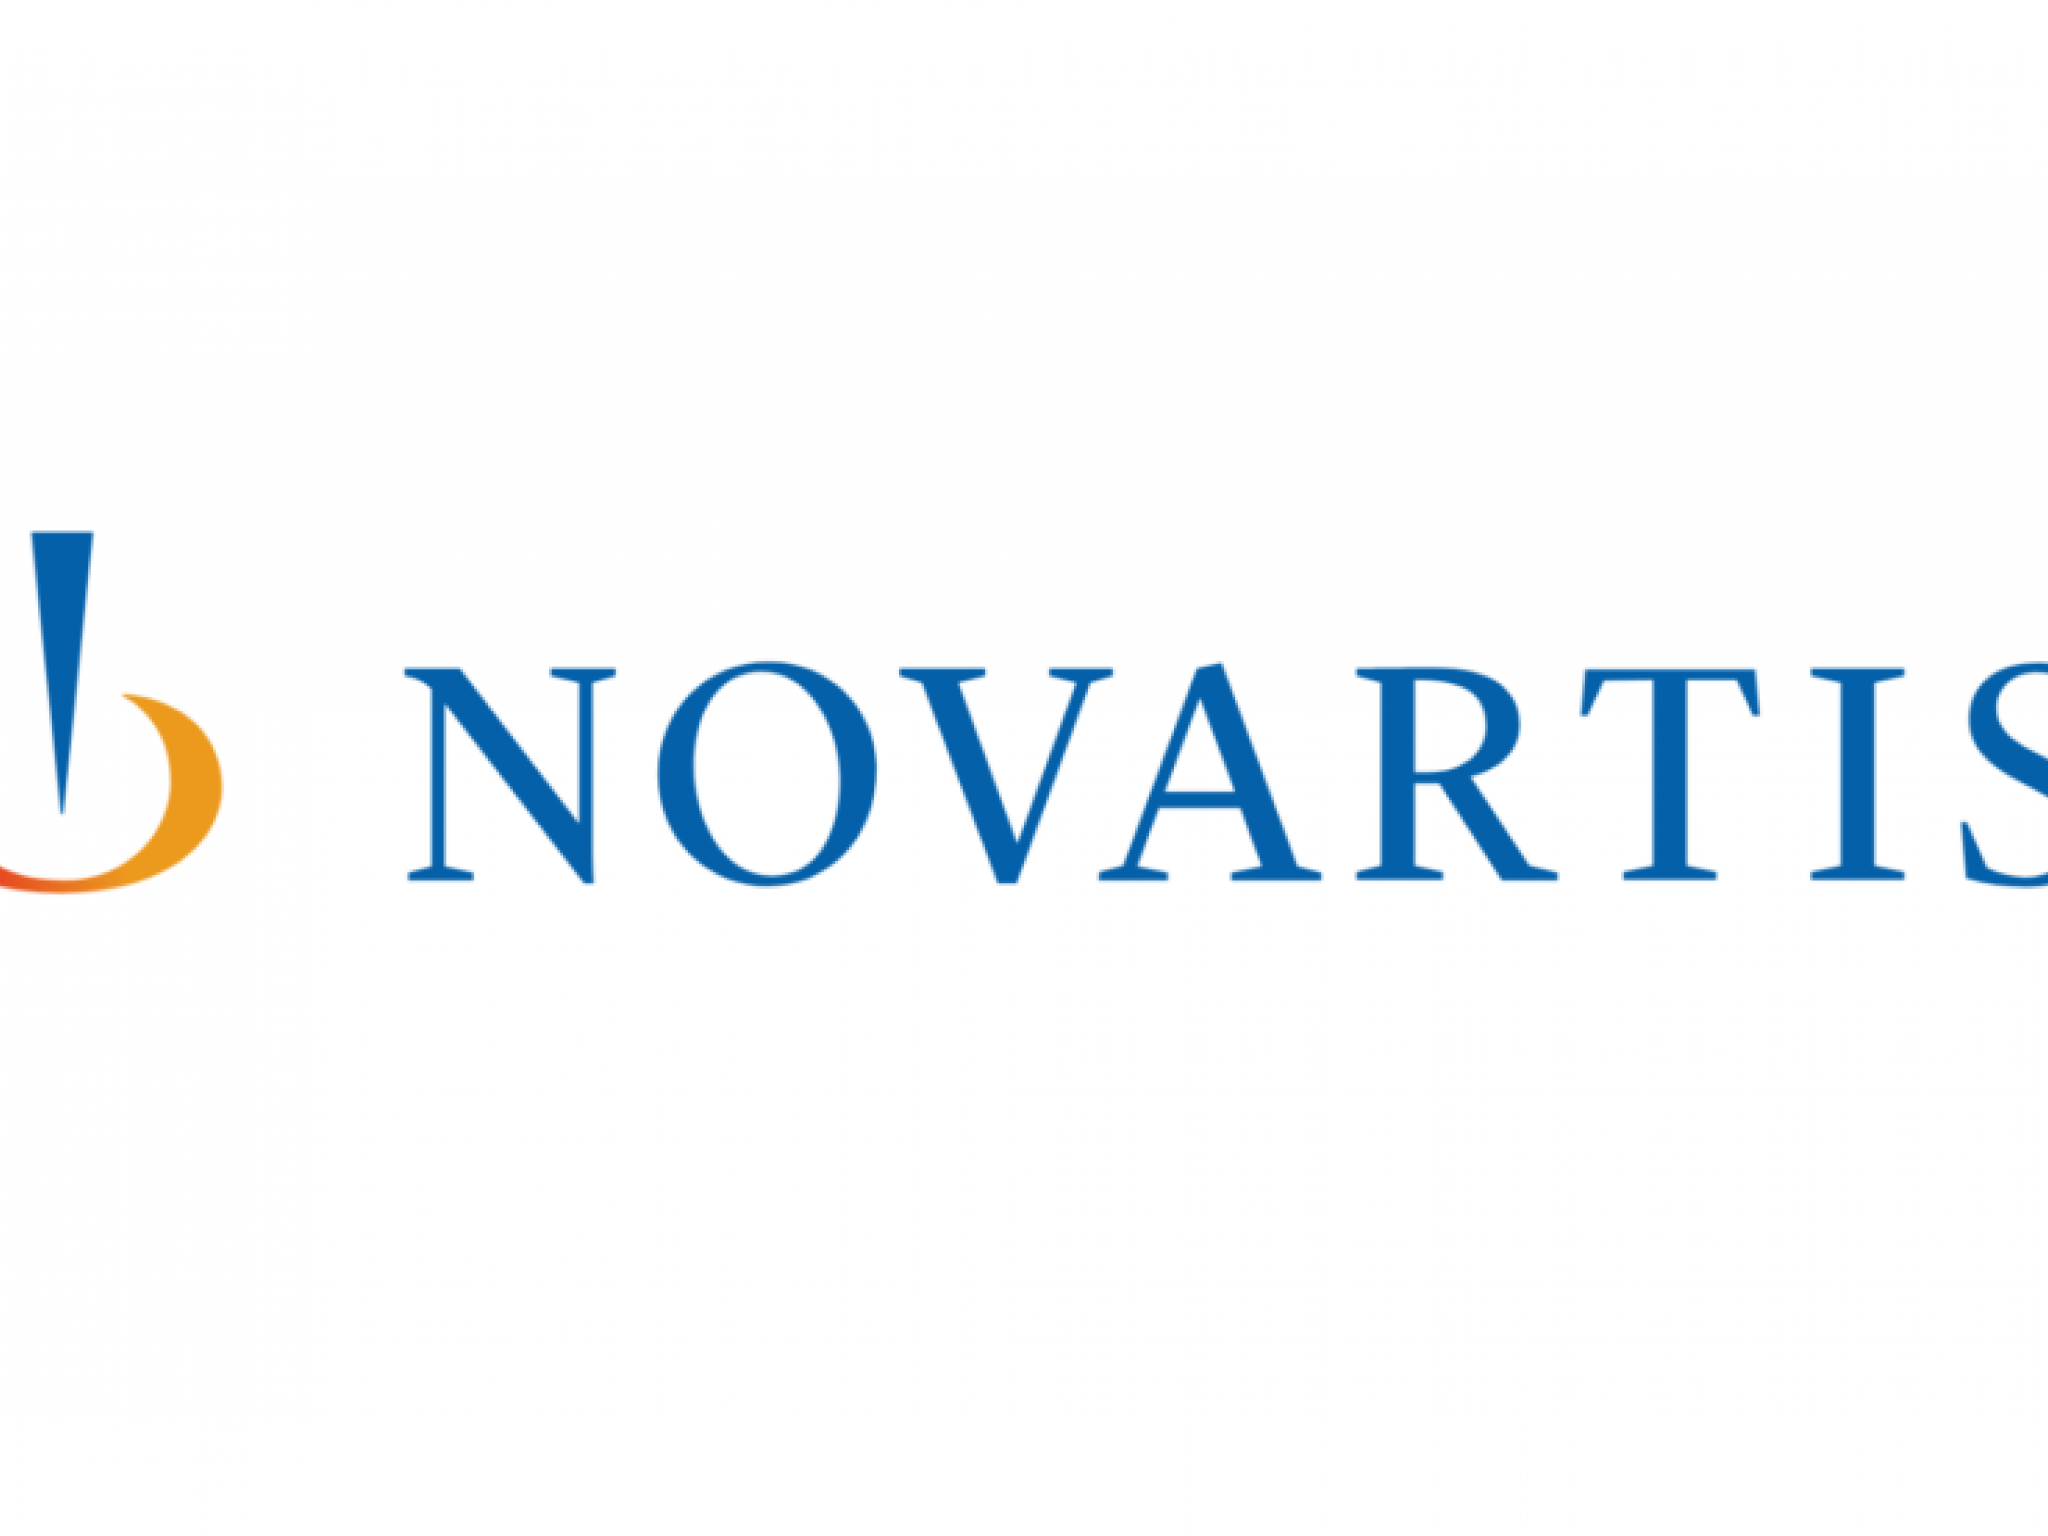  fda-approves-novartis-lutathera-as-first-therapy-for-pediatric-patients-with-gastroenteropancreatic-neuroendocrine-tumors 